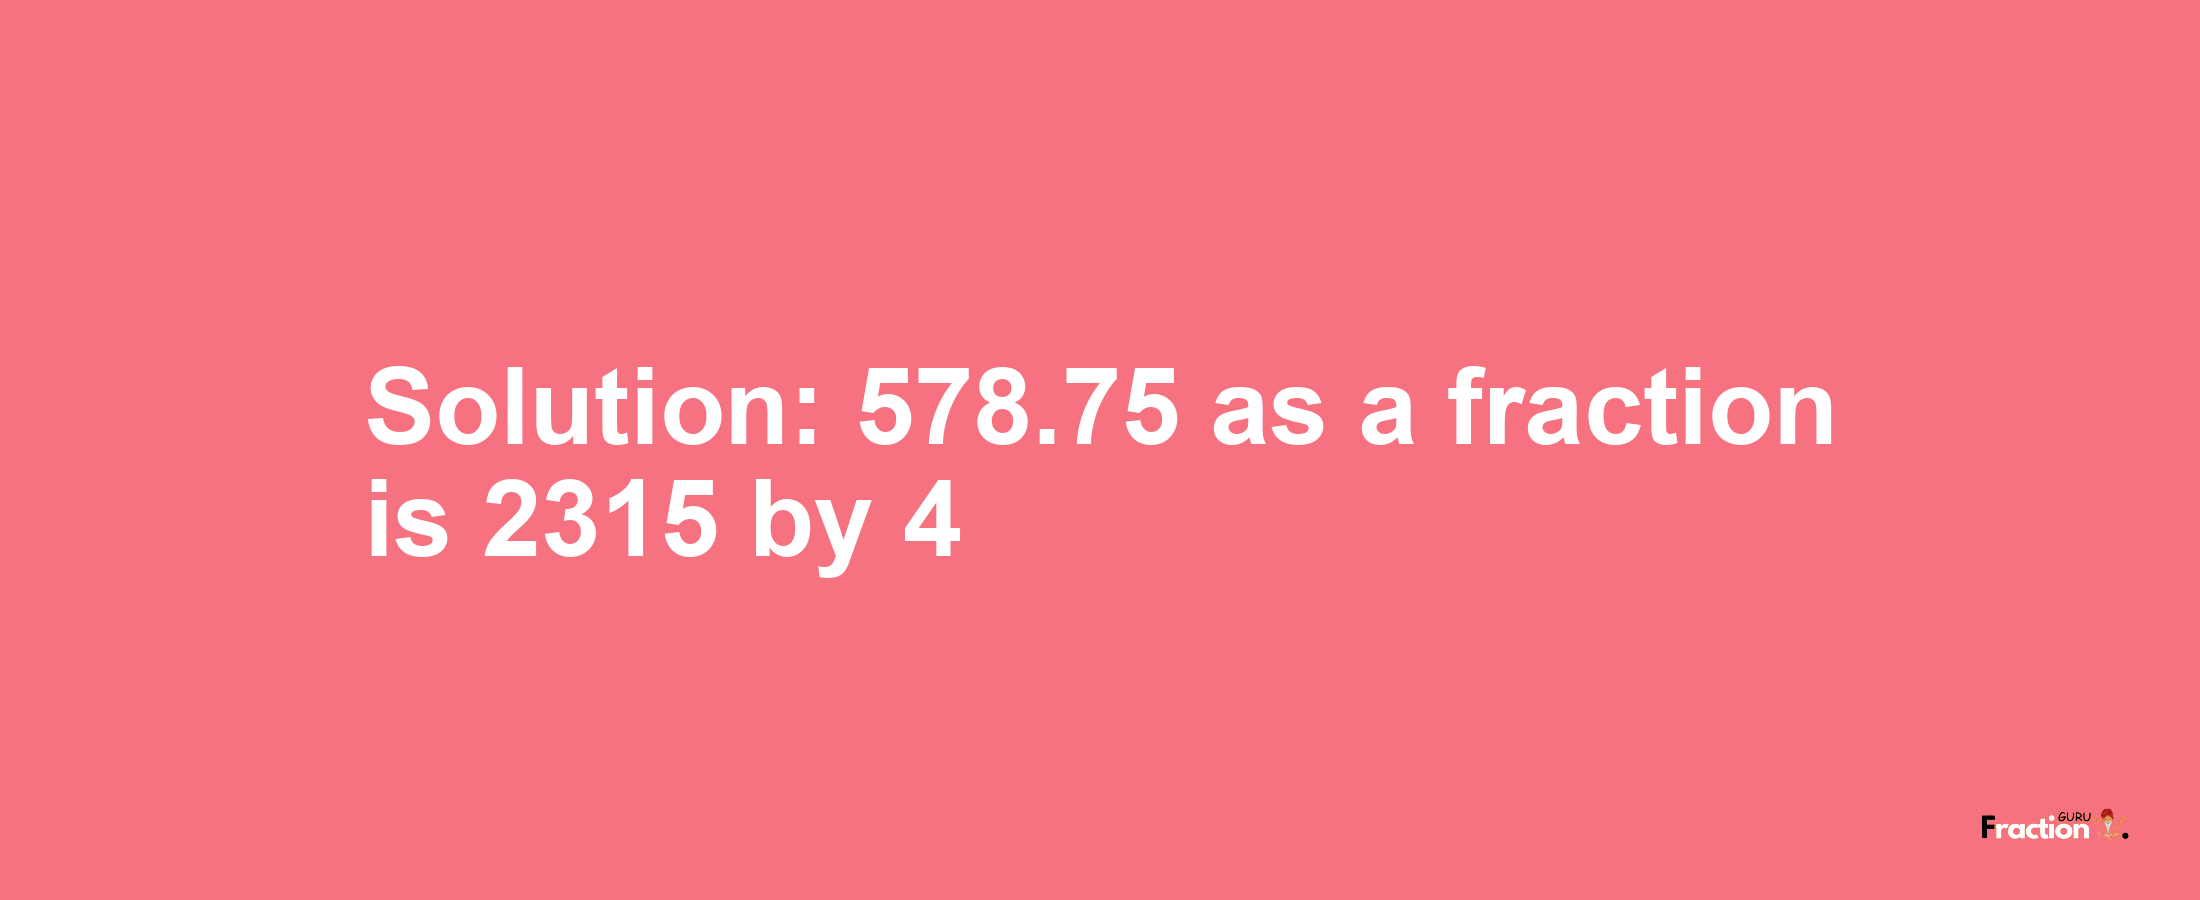 Solution:578.75 as a fraction is 2315/4